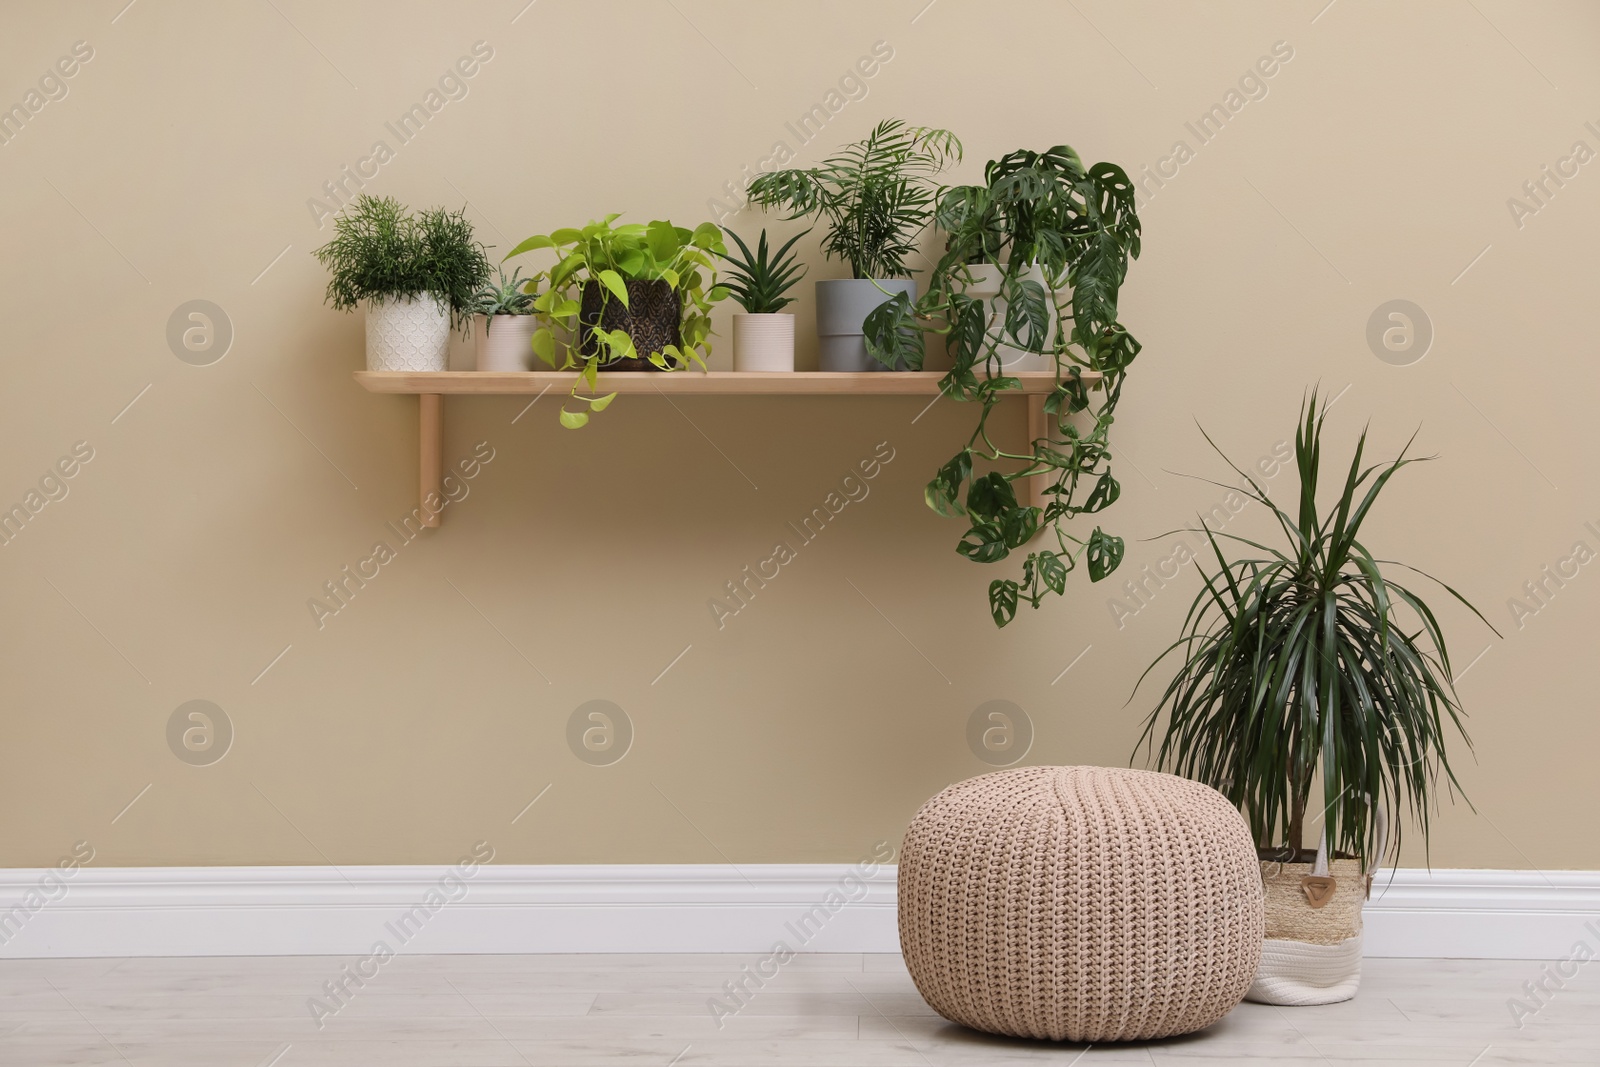 Photo of Room decorated with many different green houseplants